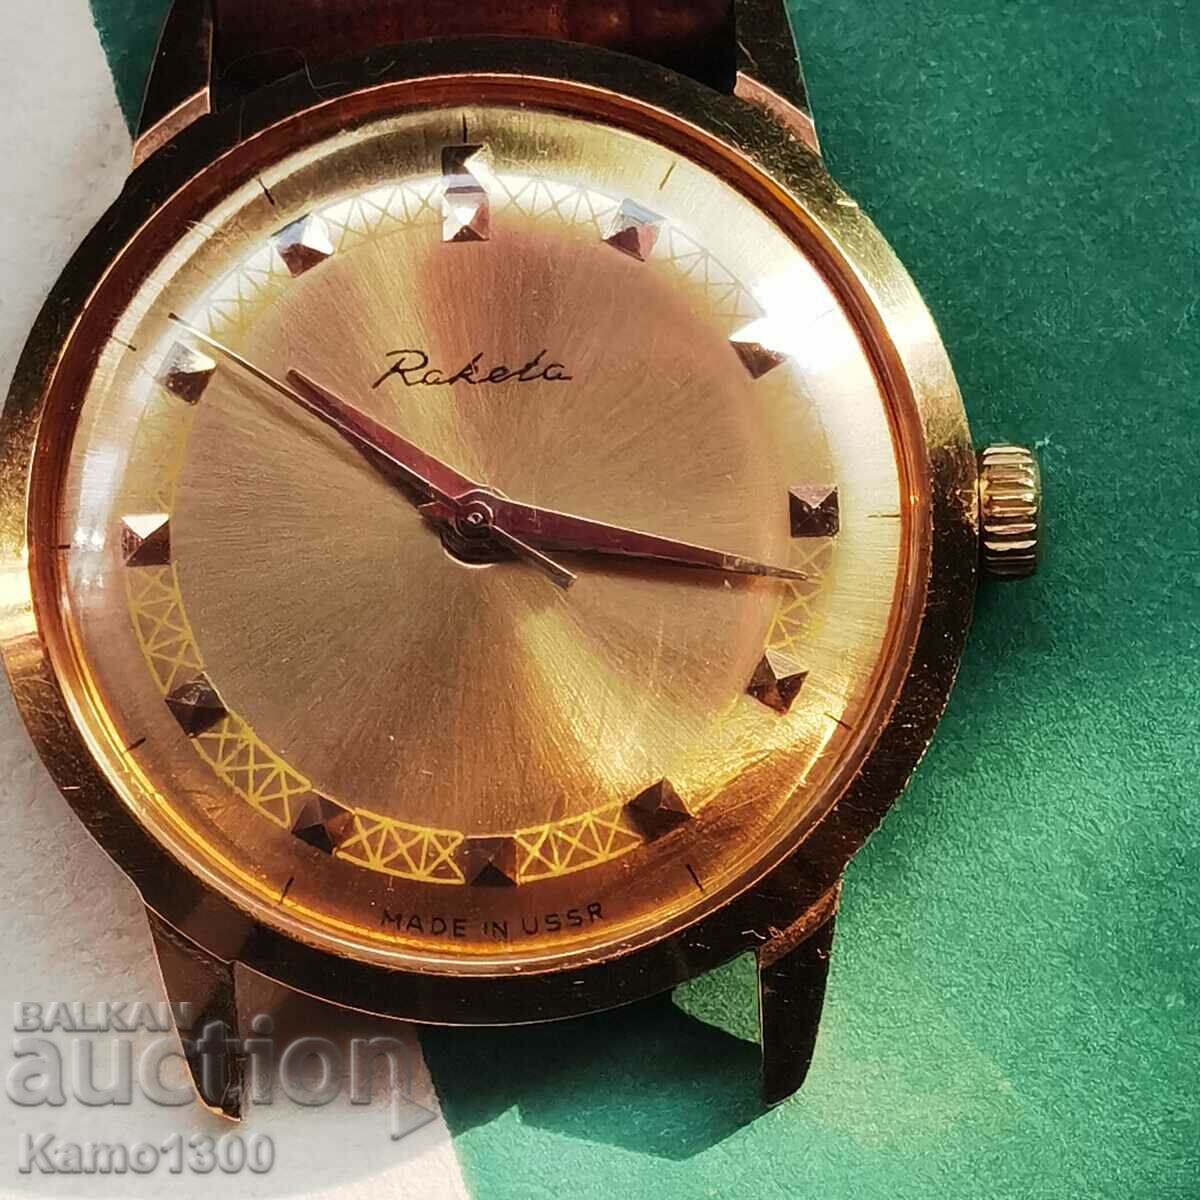 Soviet watch "Rocket" with gold plating